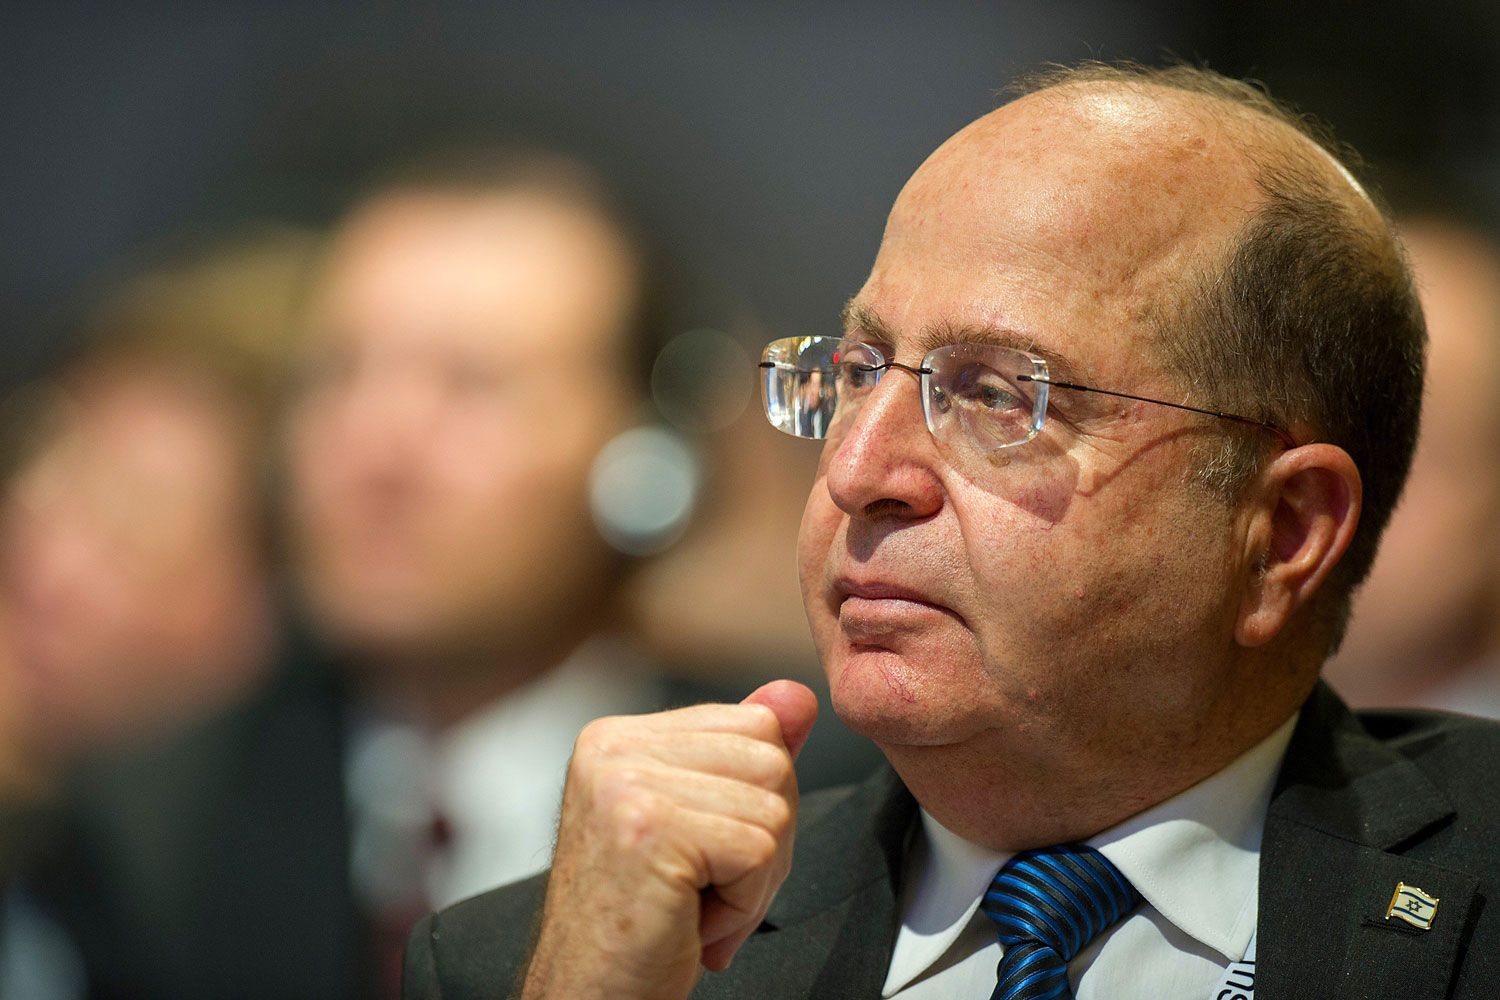 Israeli Defense Minister Moshe Ya'alon attends a meeting session of the Munich Security Conference in Munich,  Feb. 2, 2014. (Xinhua Press / Corbis)